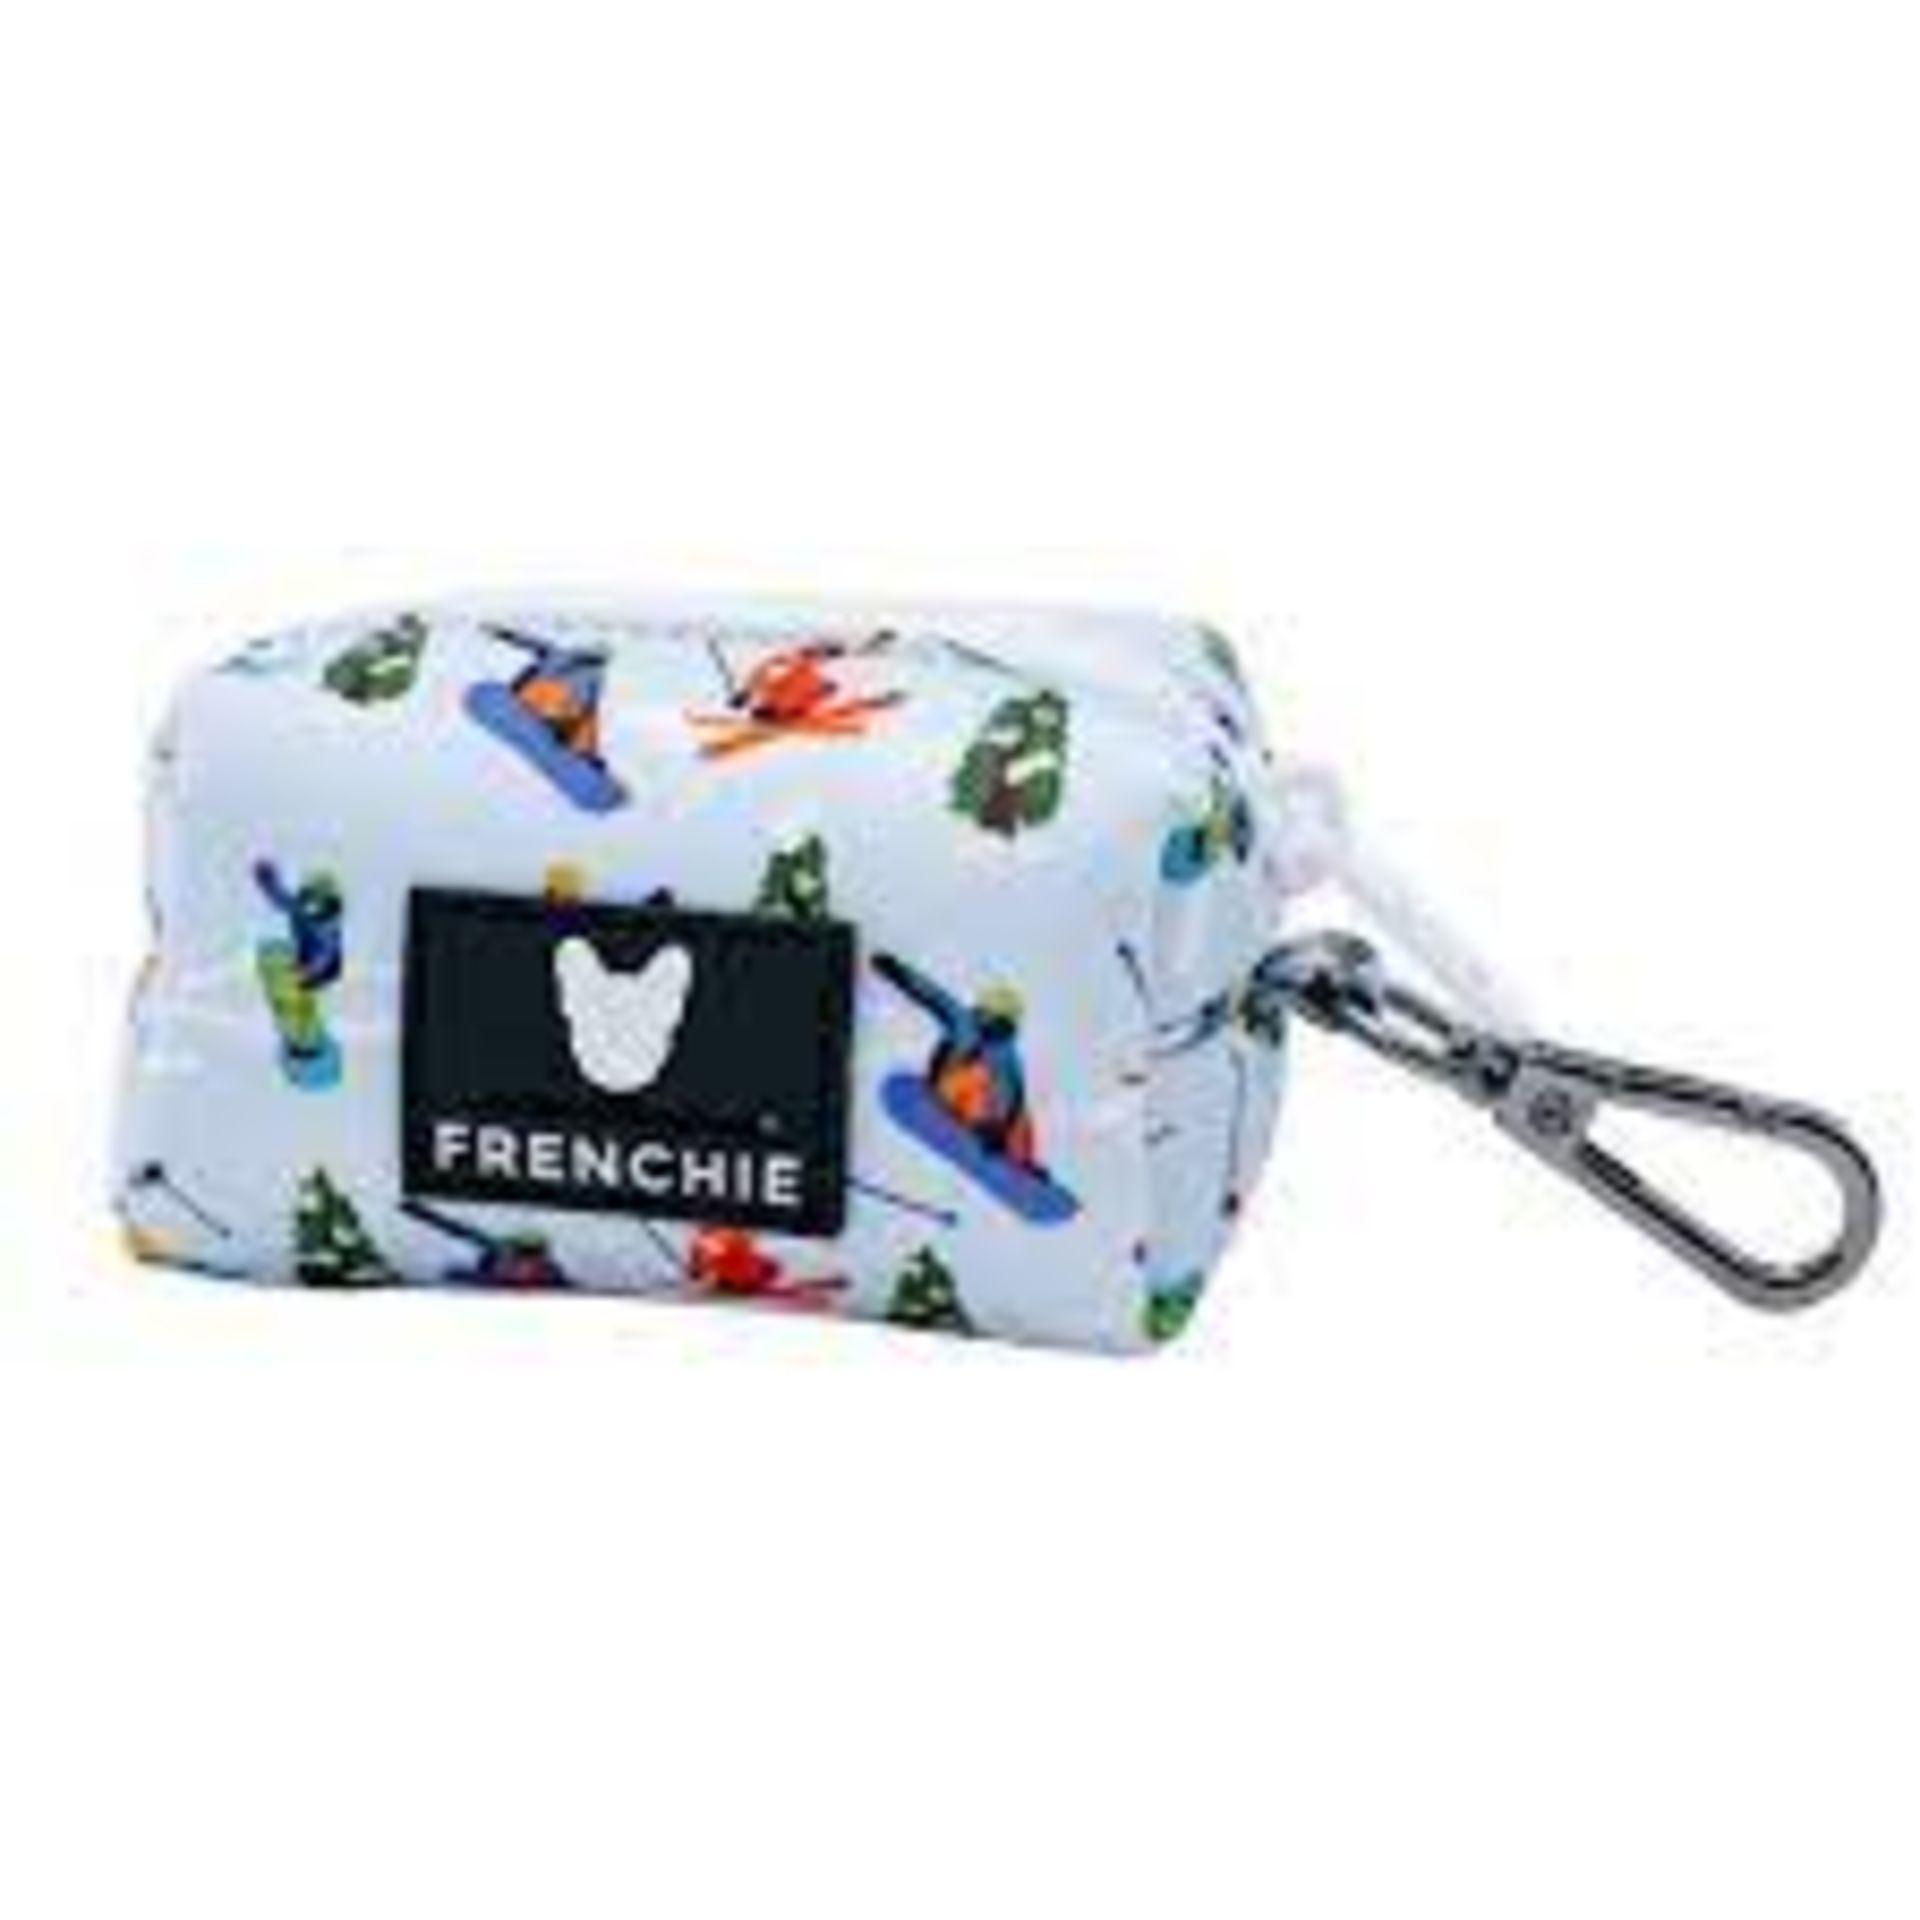 Trade Lot 100 X New .Packaged Frenchie The Bulldog Luxury Branded Dog Products. May include items - Image 20 of 50